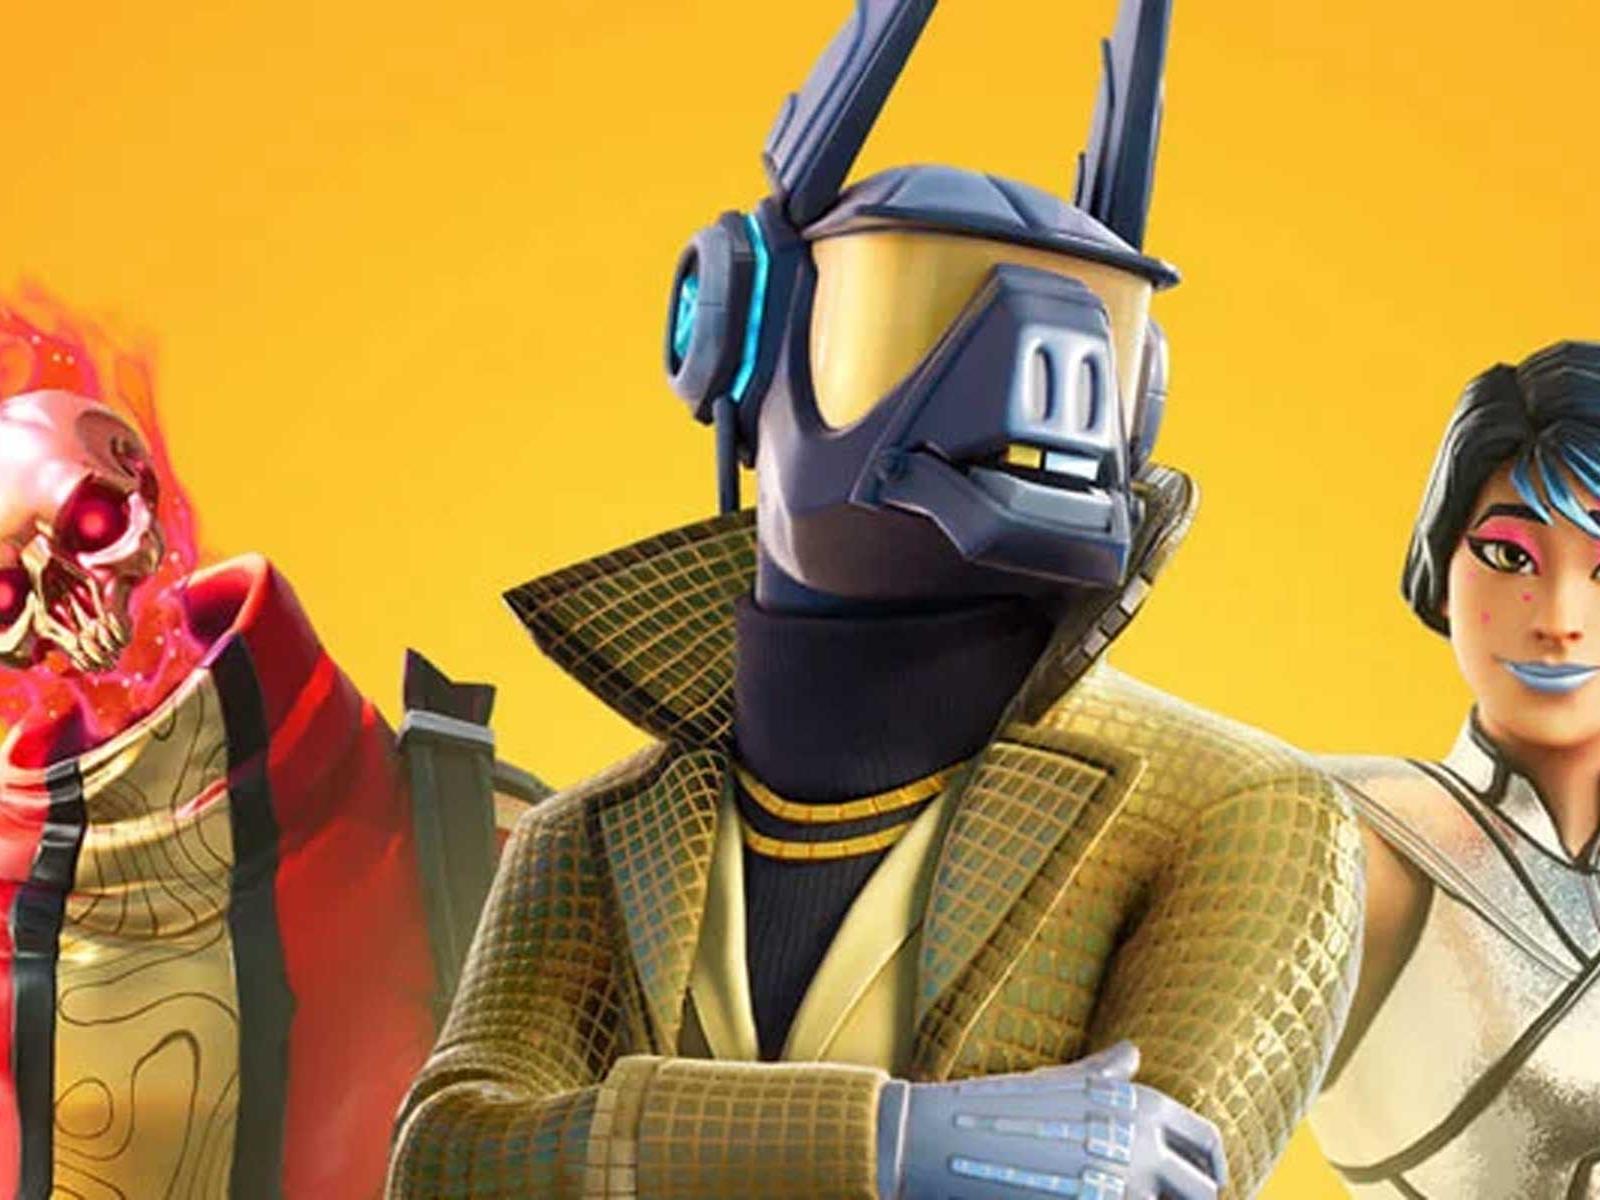 Fortnite developer Epic Games sued for 'addicted' game to children